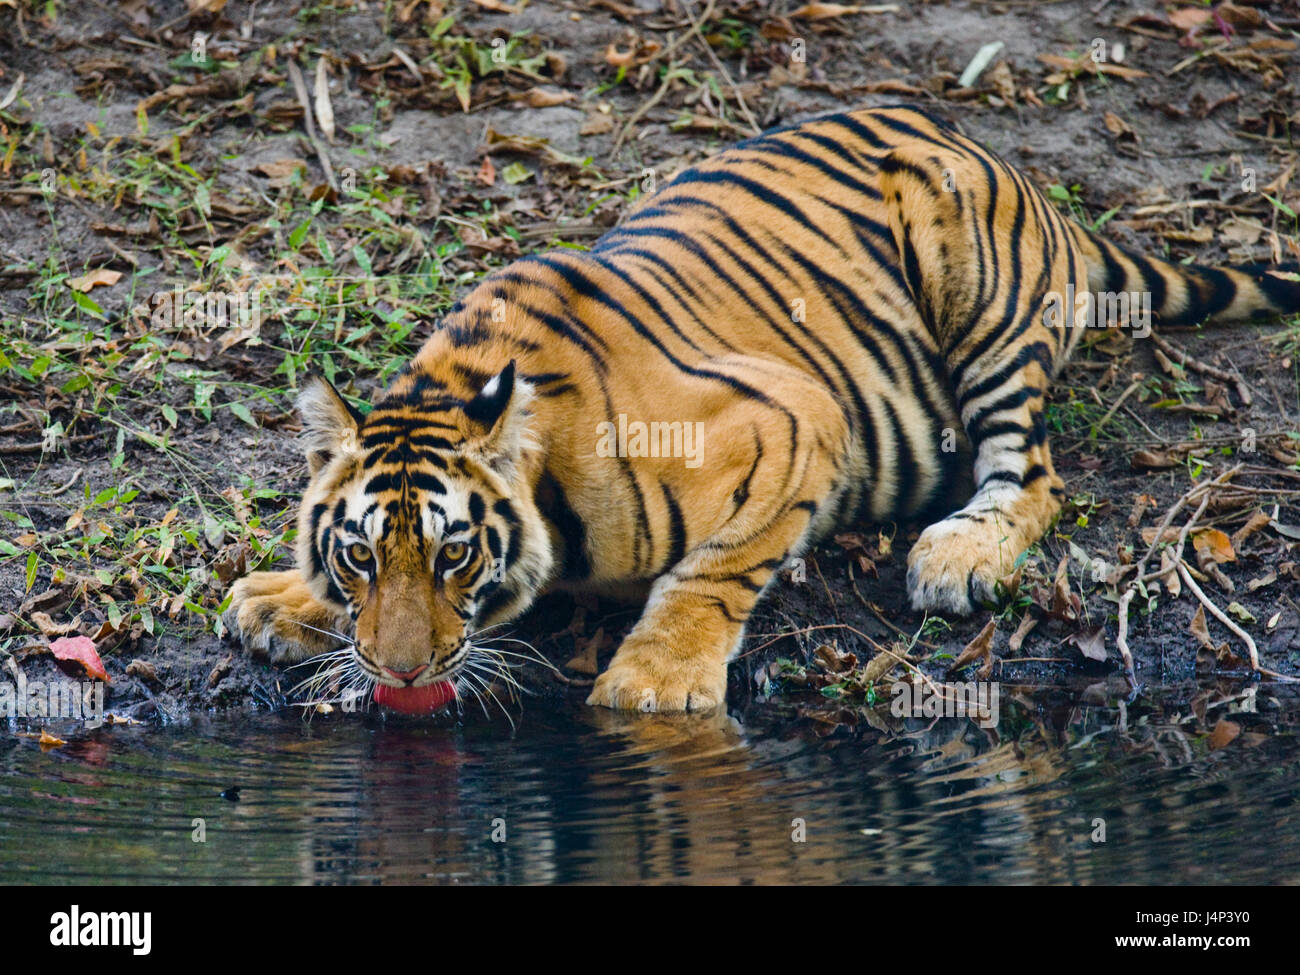 Wild Bengal Tiger drinking water from a pond in the jungle. India. Bandhavgarh National Park. Madhya Pradesh. Stock Photo